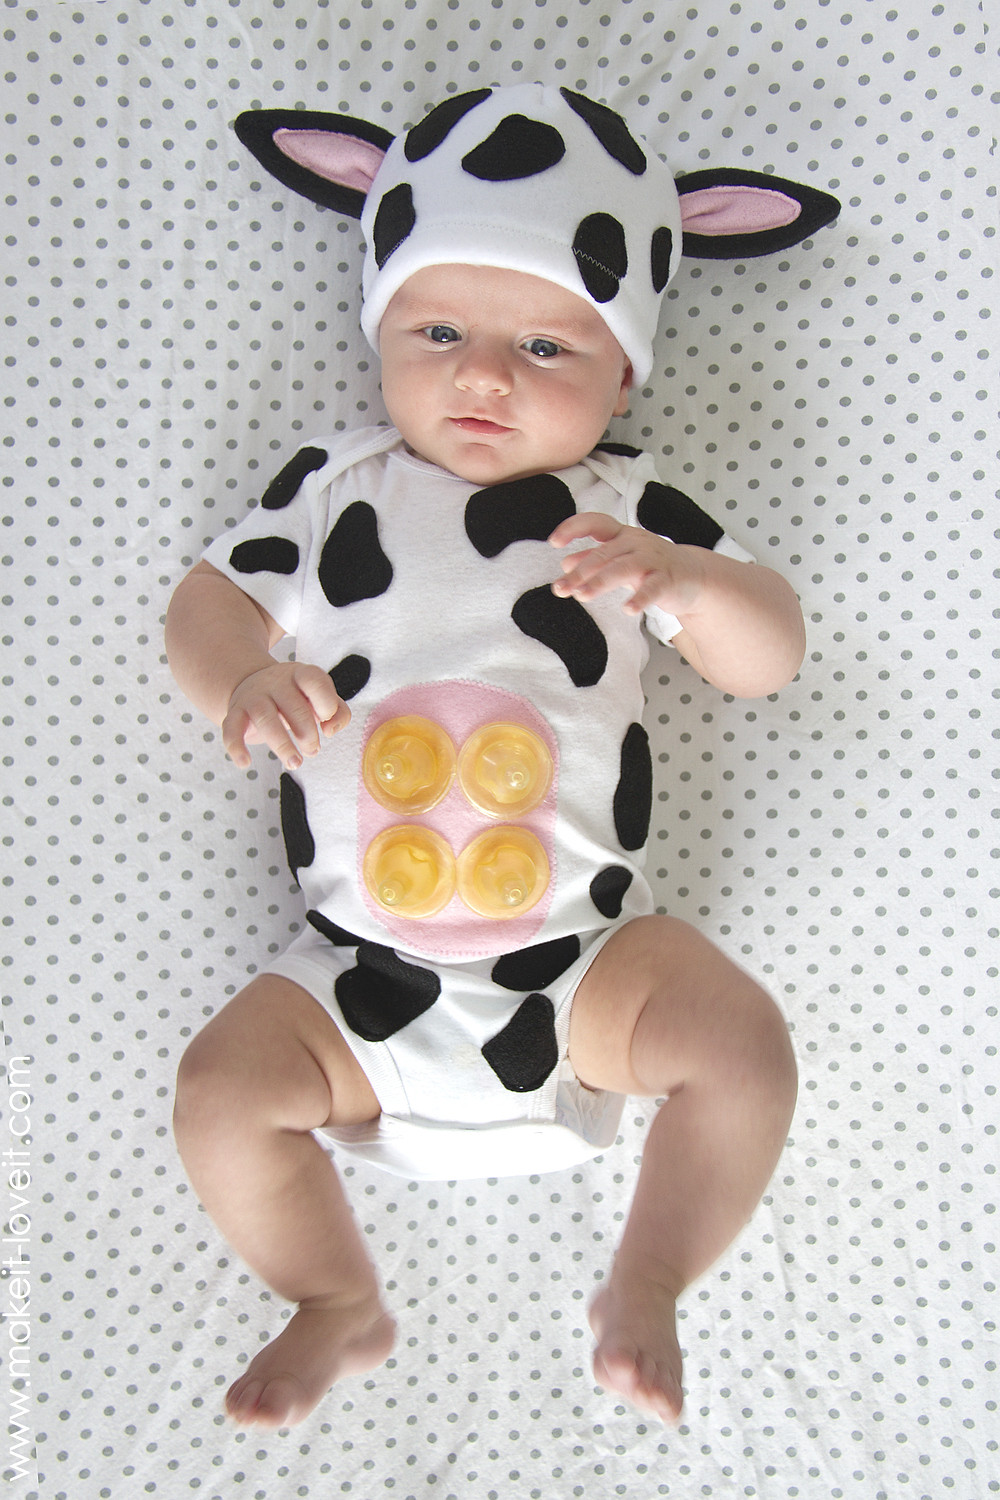 DIY Halloween Costumes For Babies
 Baby Cow Costume with an UDDER